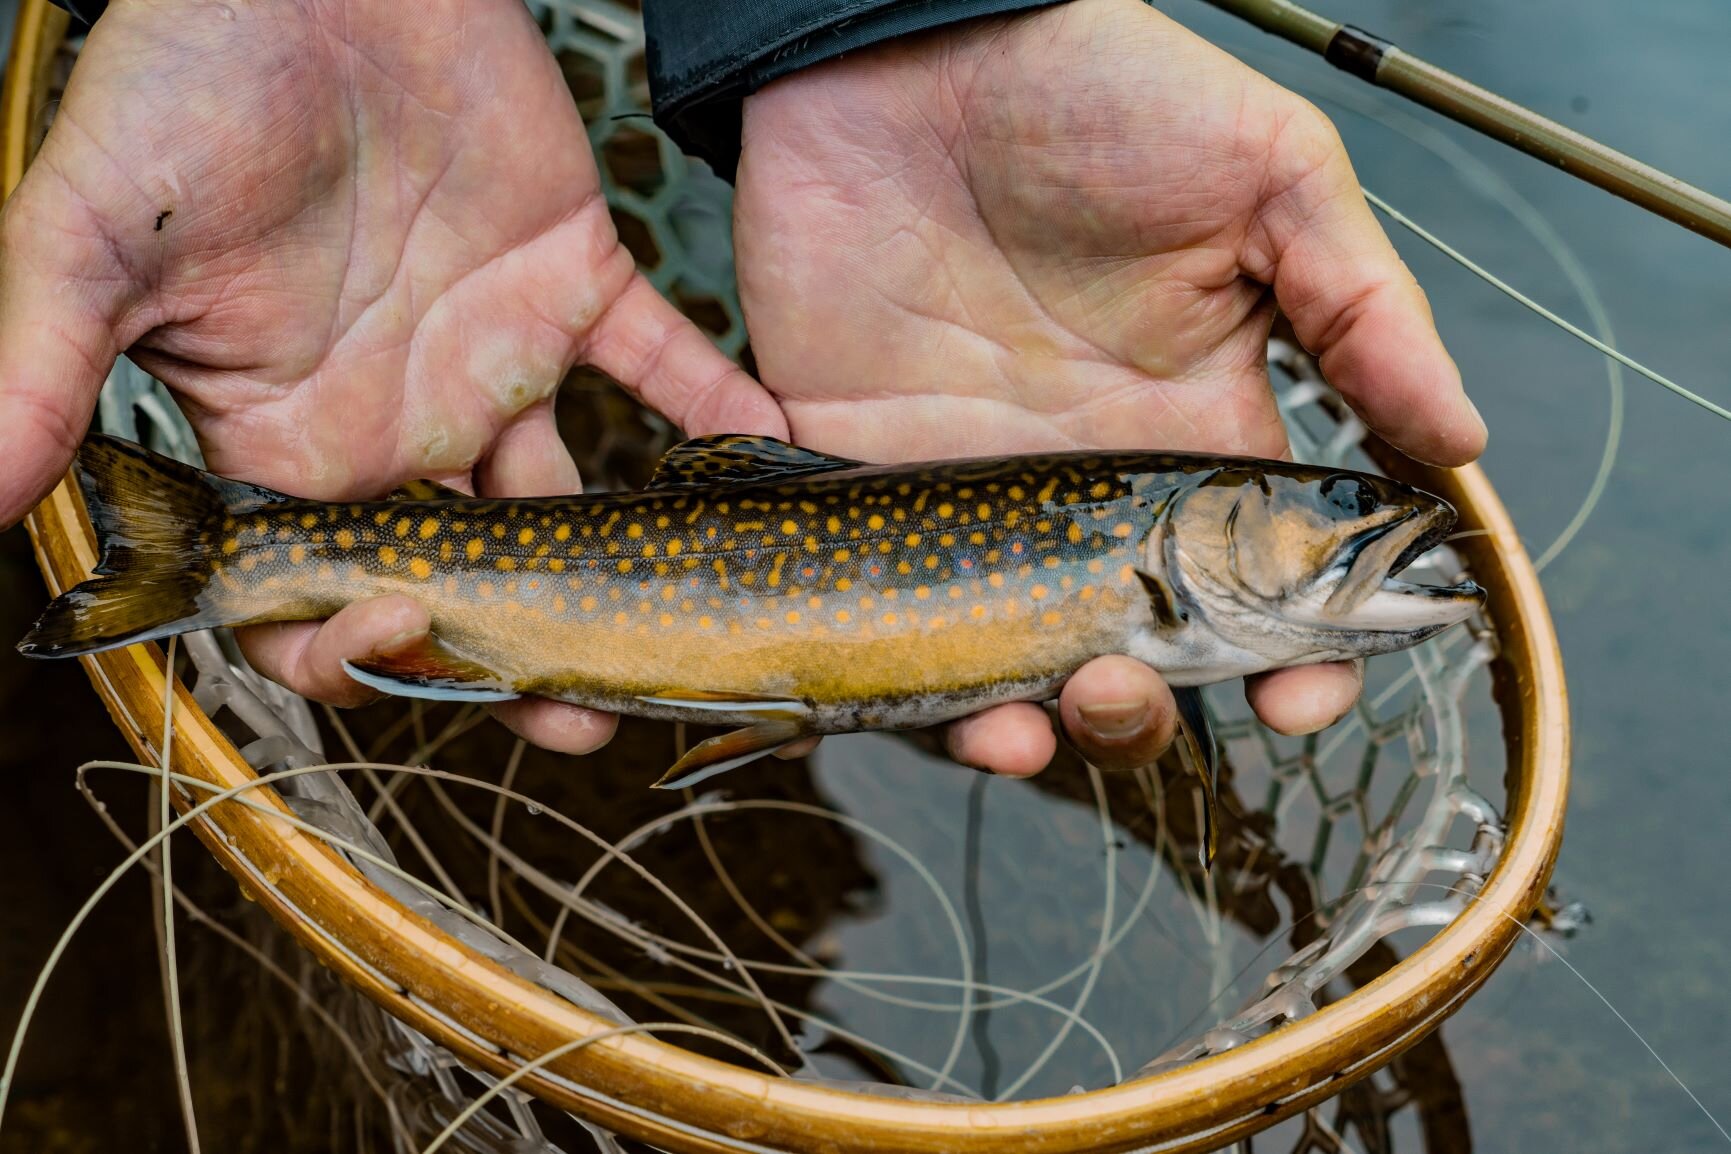 NORTHERN WATER GUIDE FLY FISHING NEW HAMPSHIRE